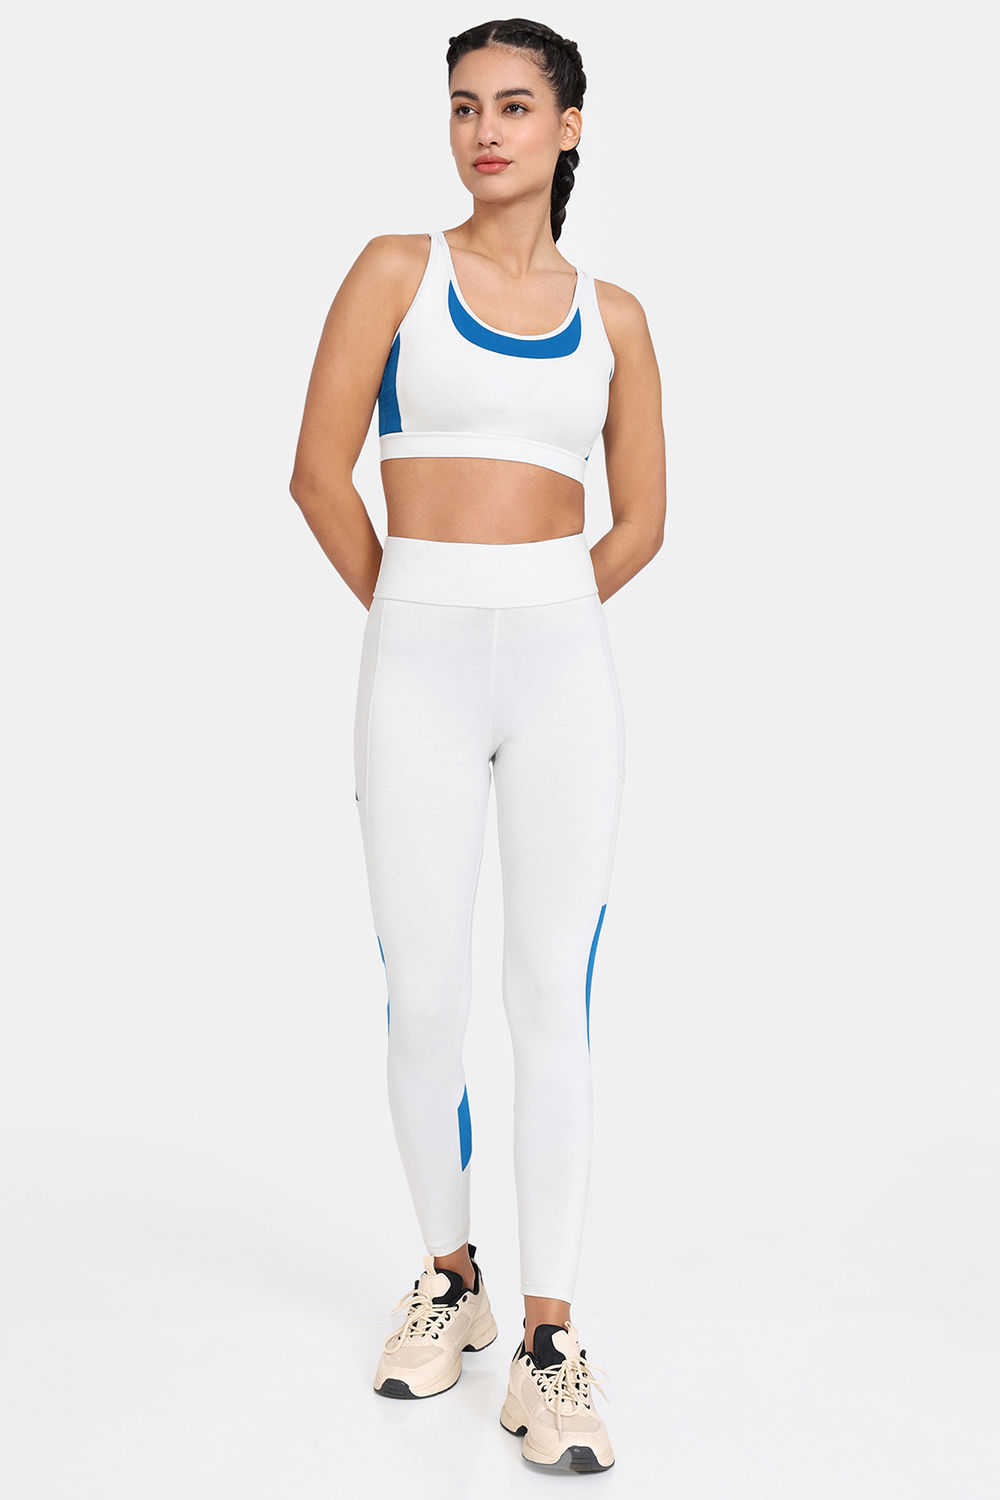 Zelocity Quick Dry Removable Padding Sports Bra With High Rise Leggings -  Blue Cobalt